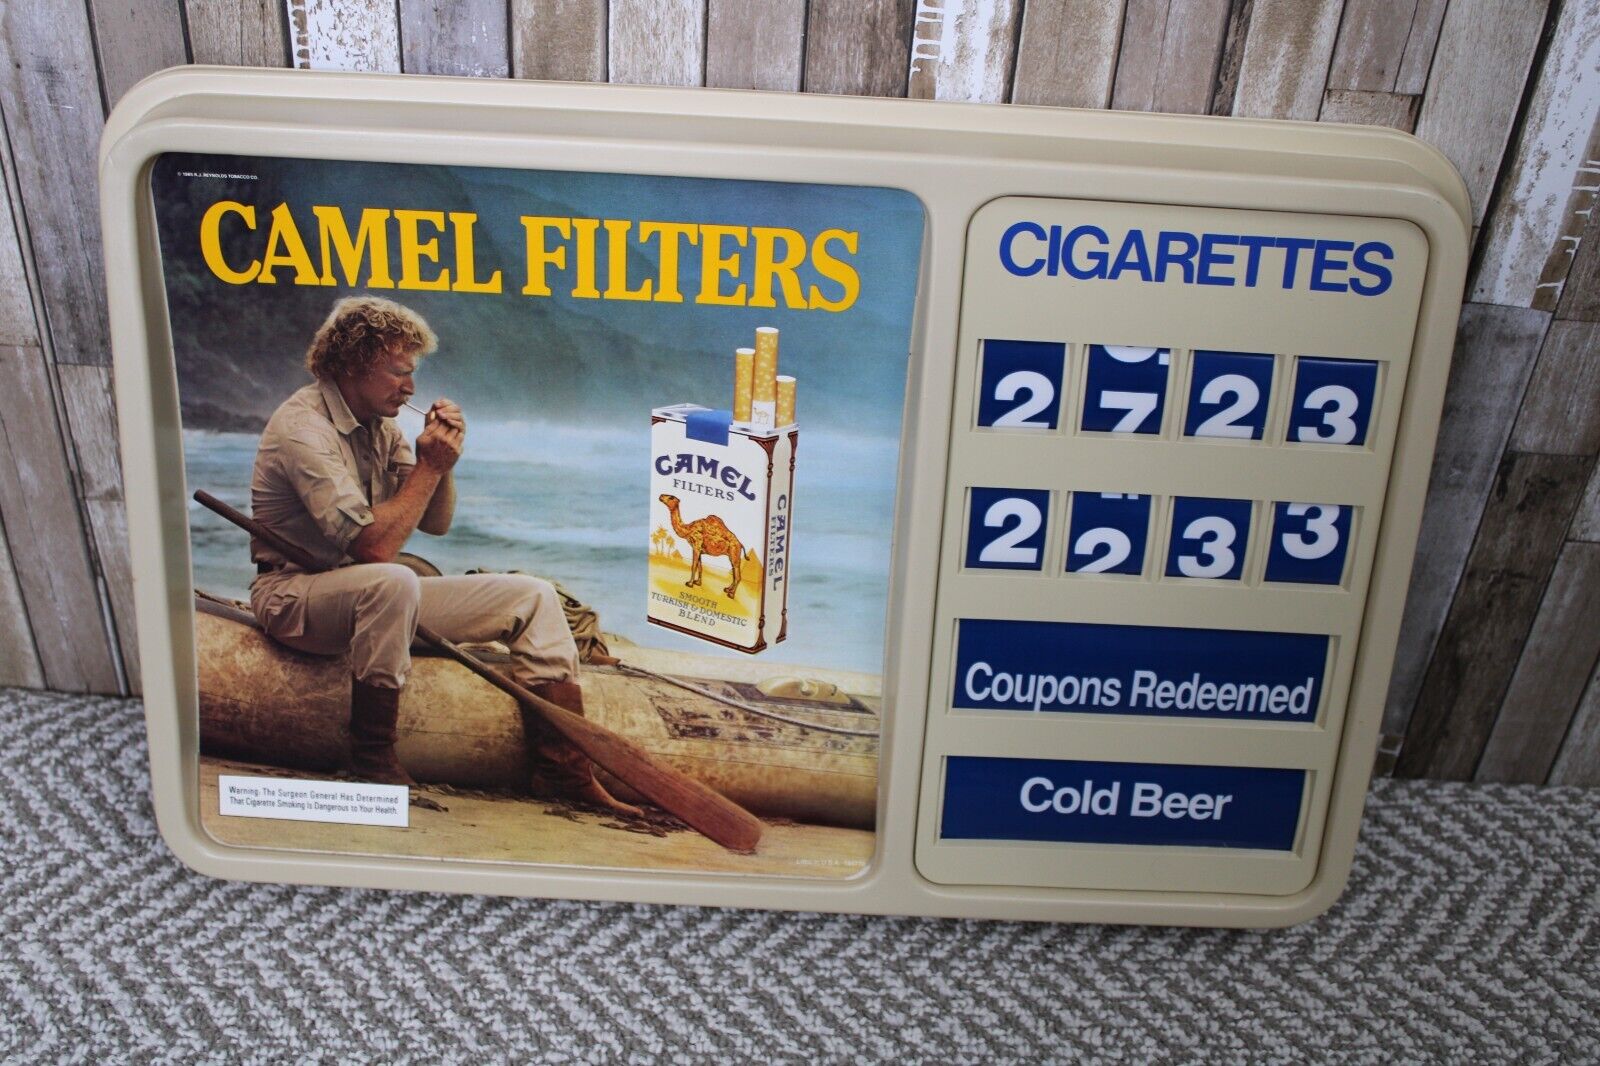 Camel Cigarette Camel Filters Store Price Sign Everbrite Electric Signs Inc.